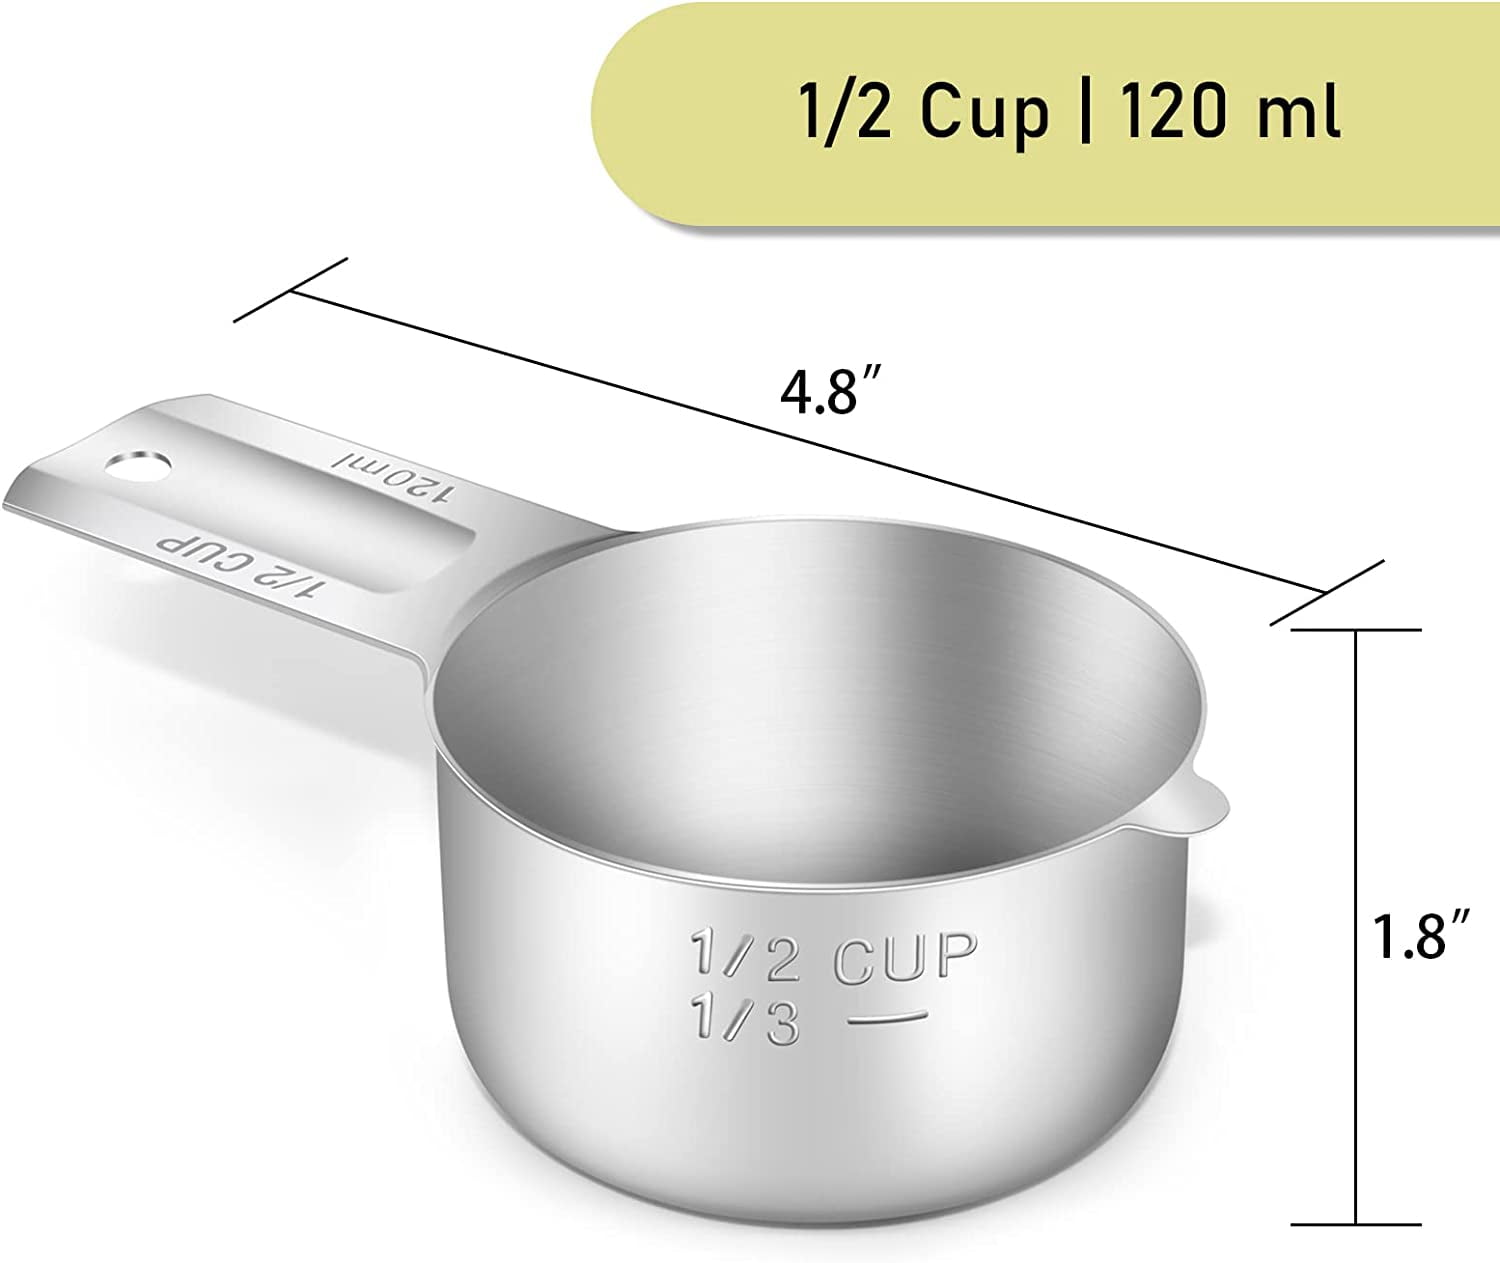 Color Up Premium 2 Cup Measuring Cup (480ml) - Stainless Steel, One-Piece Construction, Dishwasher Safe, Accurate for Wet & Dry Ingredients – One